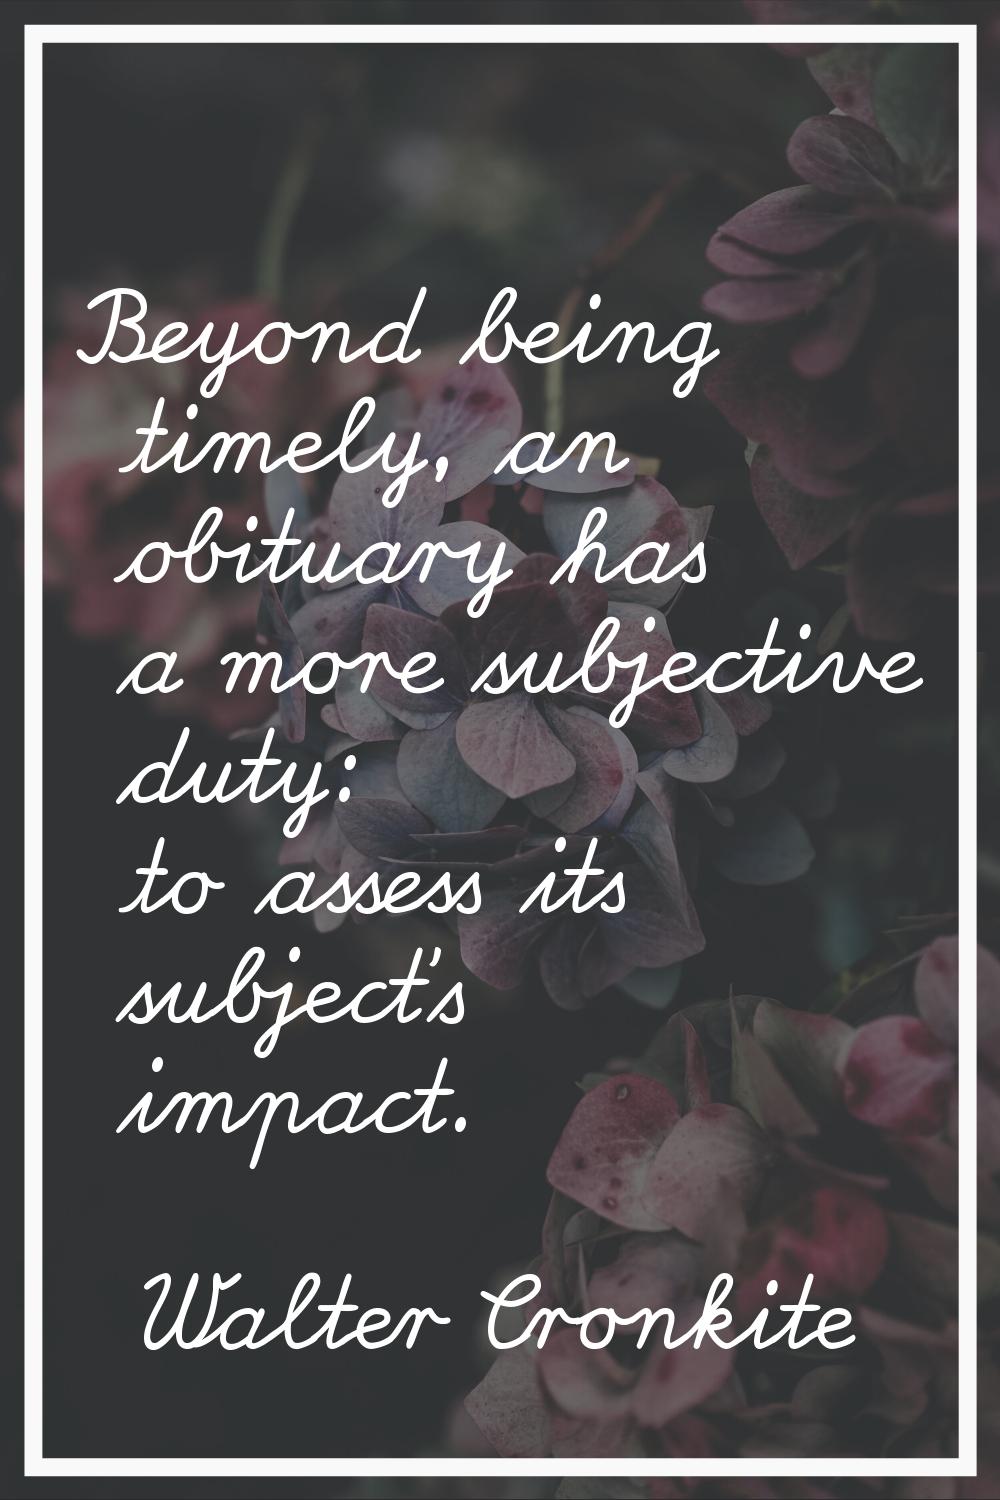 Beyond being timely, an obituary has a more subjective duty: to assess its subject's impact.